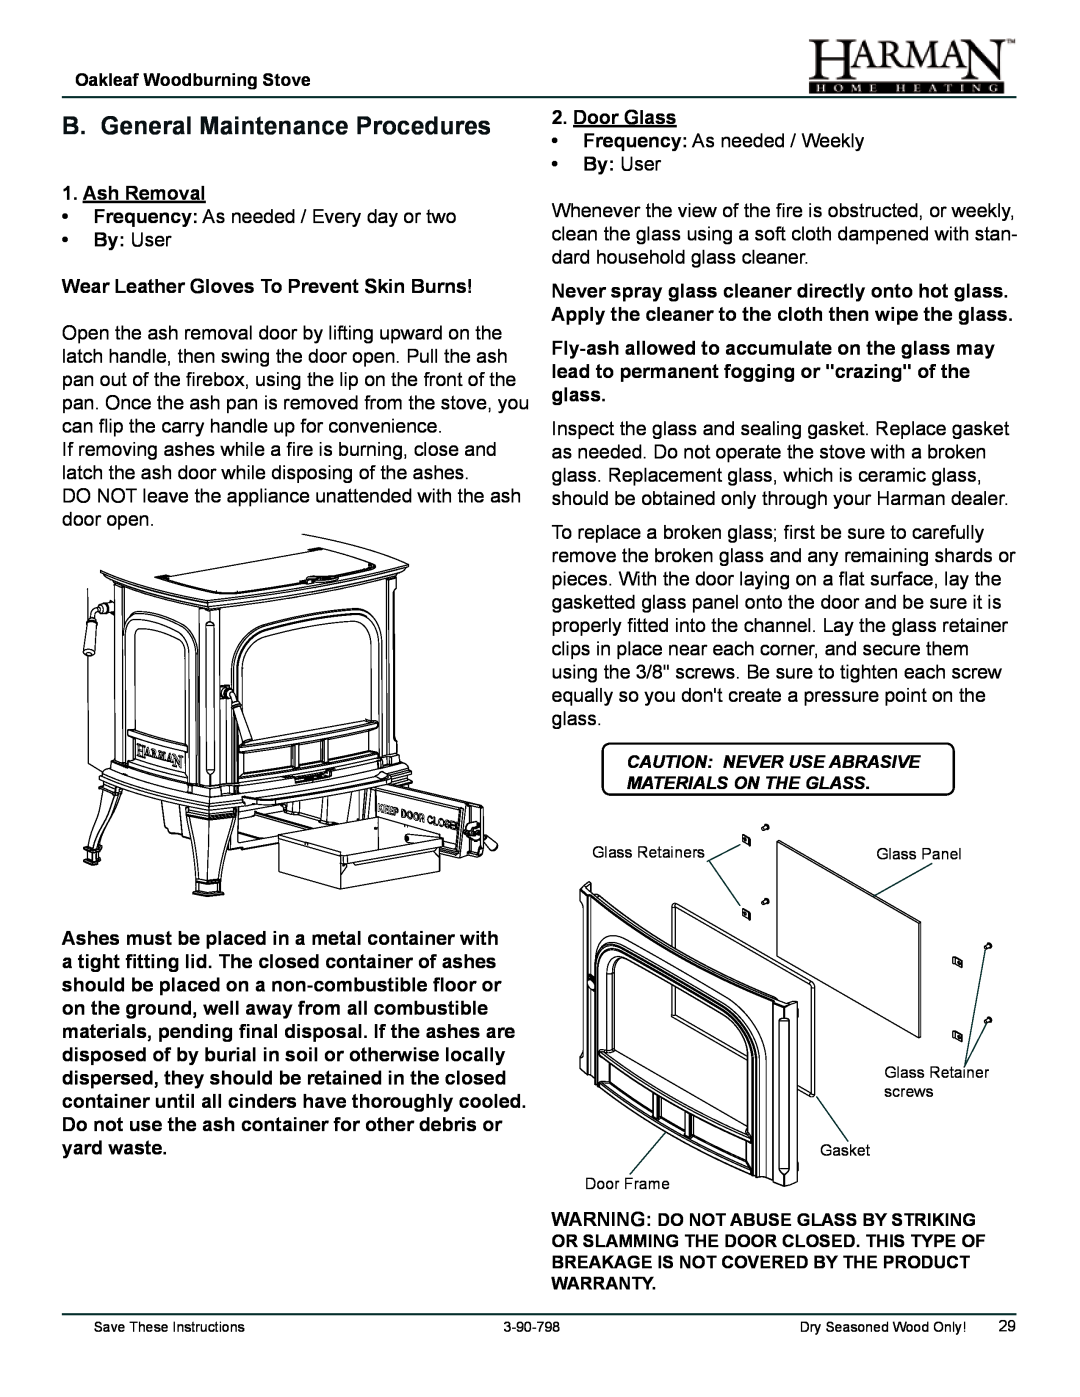 Harman Stove Company 1-90-797000 manual B. General Maintenance Procedures, Ash Removal, By User, Door Glass 